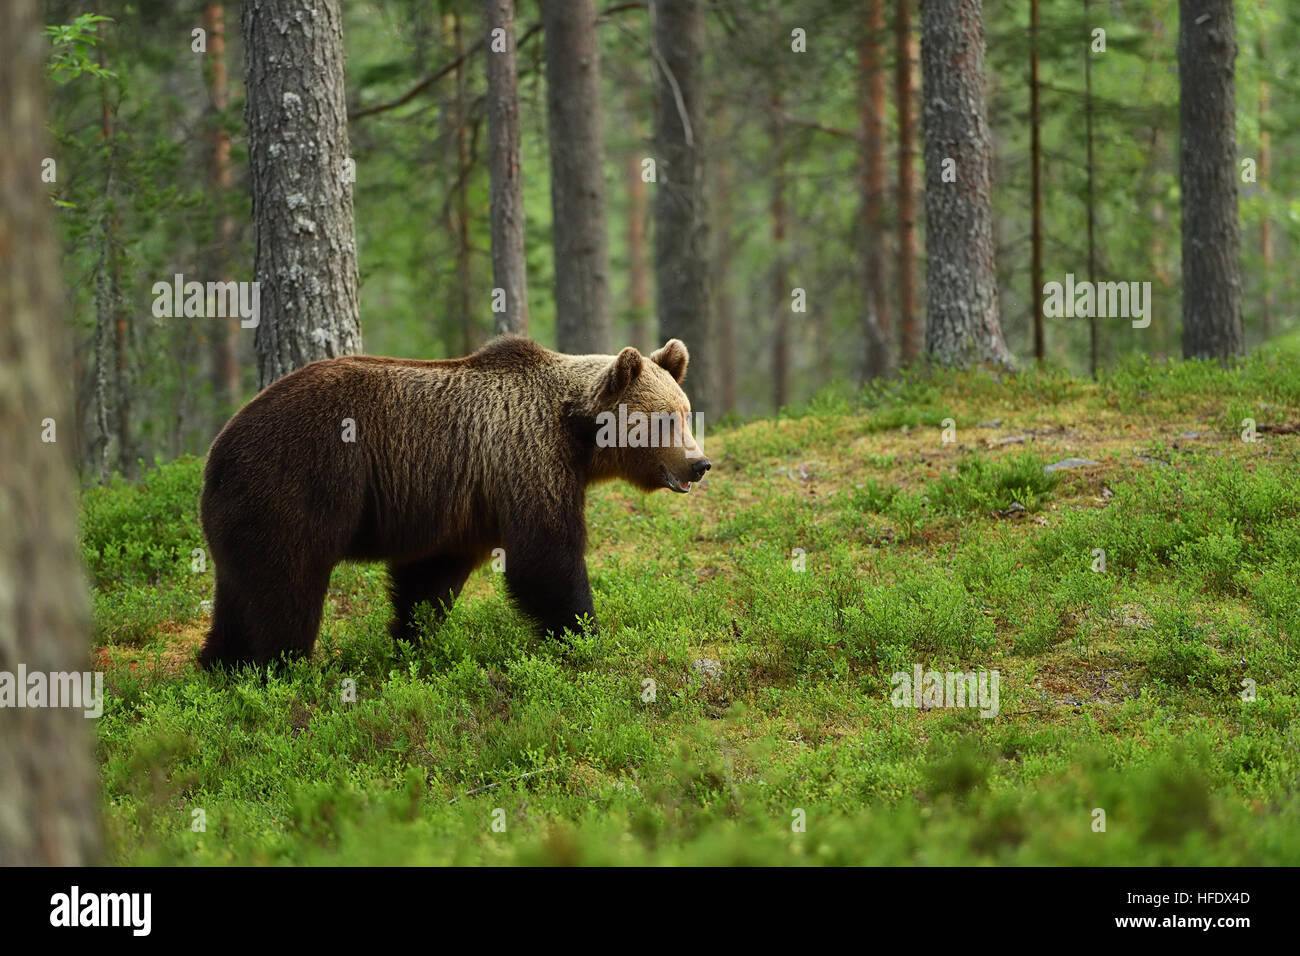 brown bear in a forest at summer Stock Photo